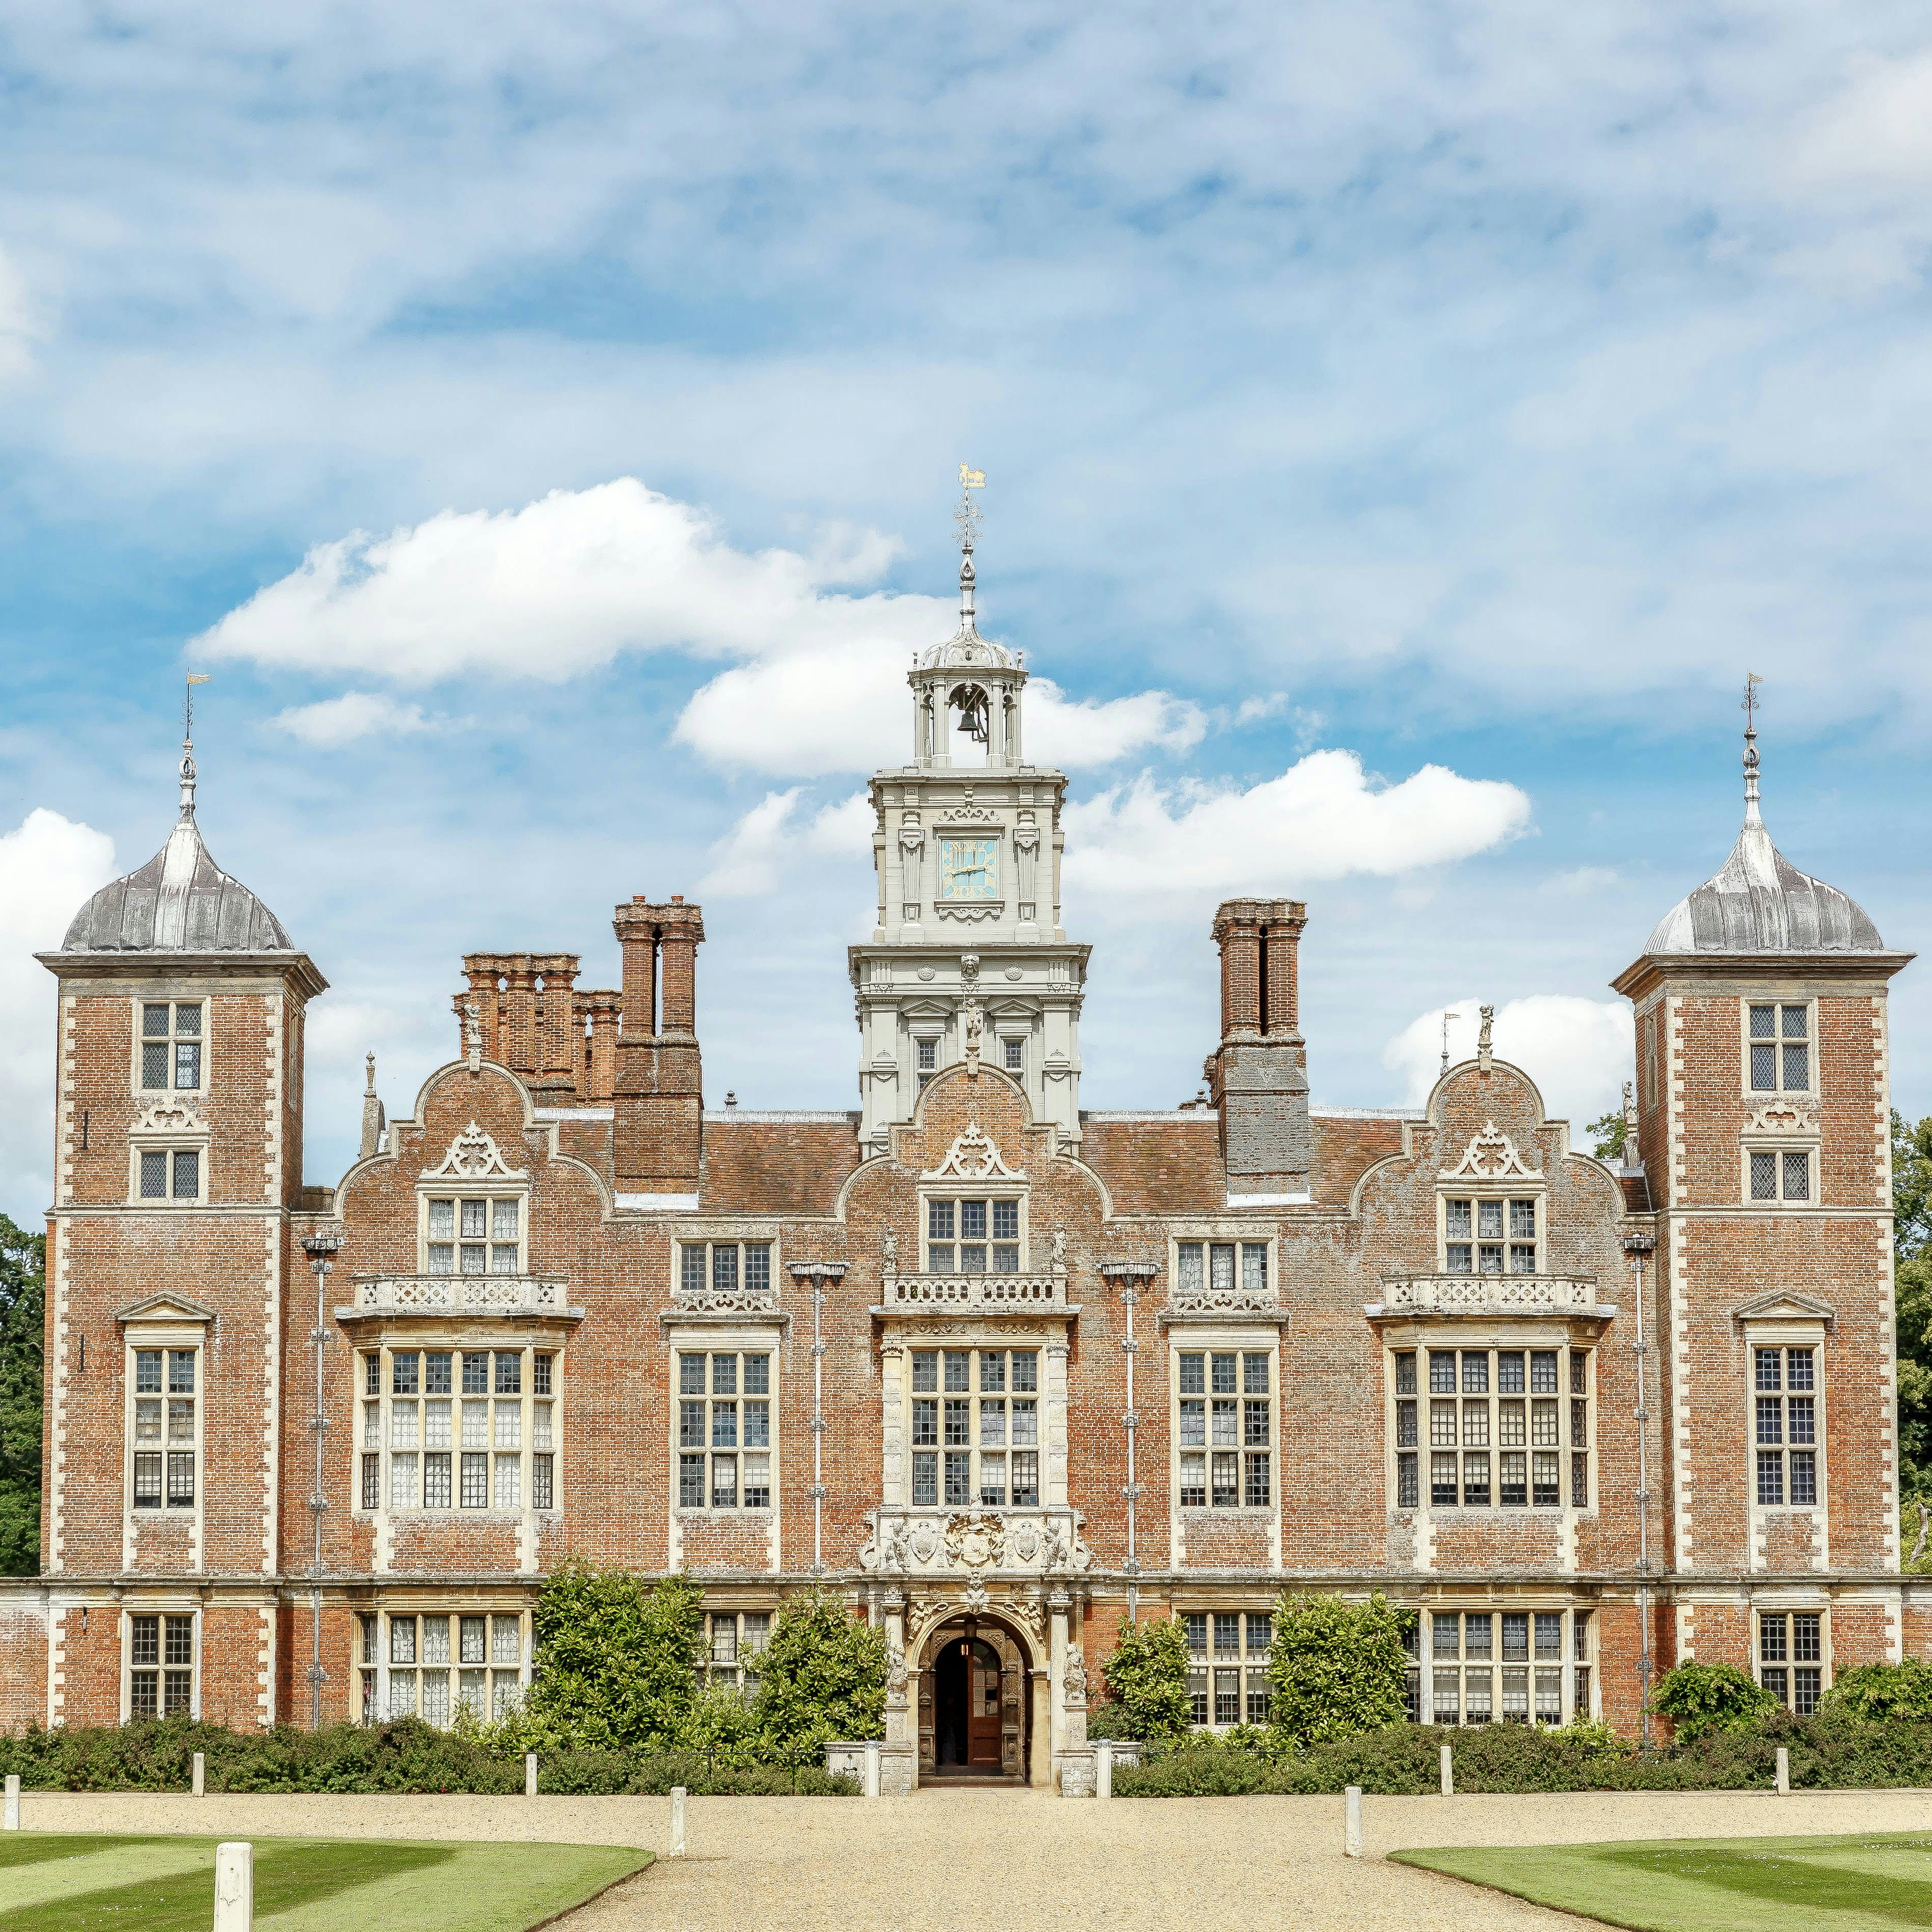 Frontal view of the manor house of Blickling Hall in the village of Blickling north of Aylsham in Norfolk County, England, UK